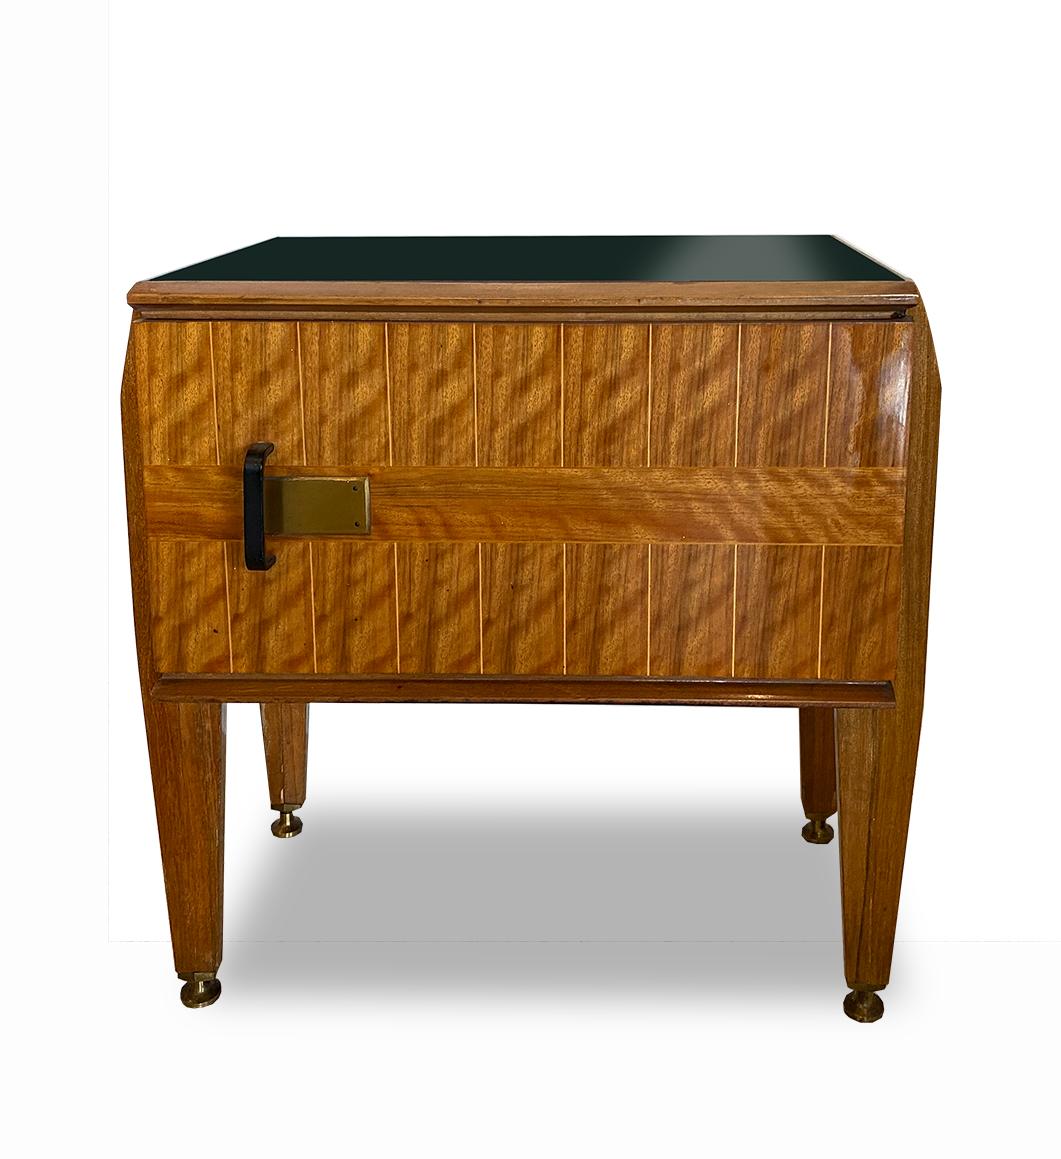 A rectangular pair of tables with glass inset top, above an inlaid cabinet of inlaid rare and burled woods. One door opens to reveal ample storage space. The cabinet sits upon 4 tapered legs, terminating in bronze mounted feet. The front door has an